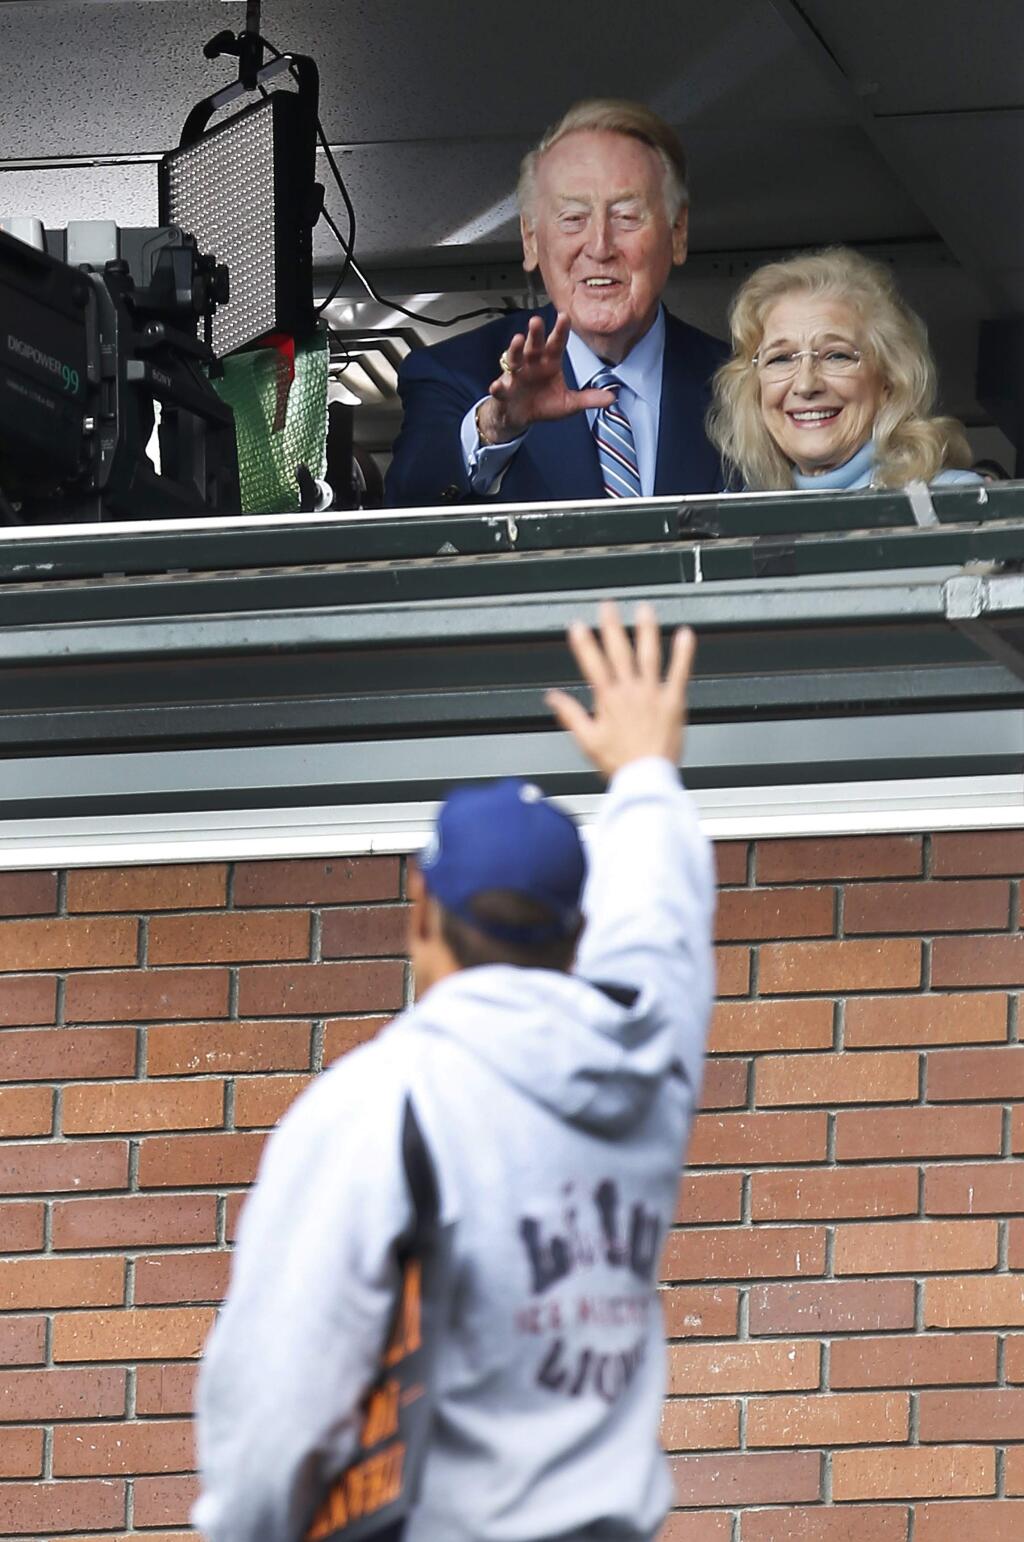 Los Angeles Dodgers announcer Vin Scully with his wife Sandi, waves to a fan before a baseball game between the San Francisco Giants and the Dodgers in San Francisco, Sunday, Oct. 2, 2016. (AP Photo/Tony Avelar)